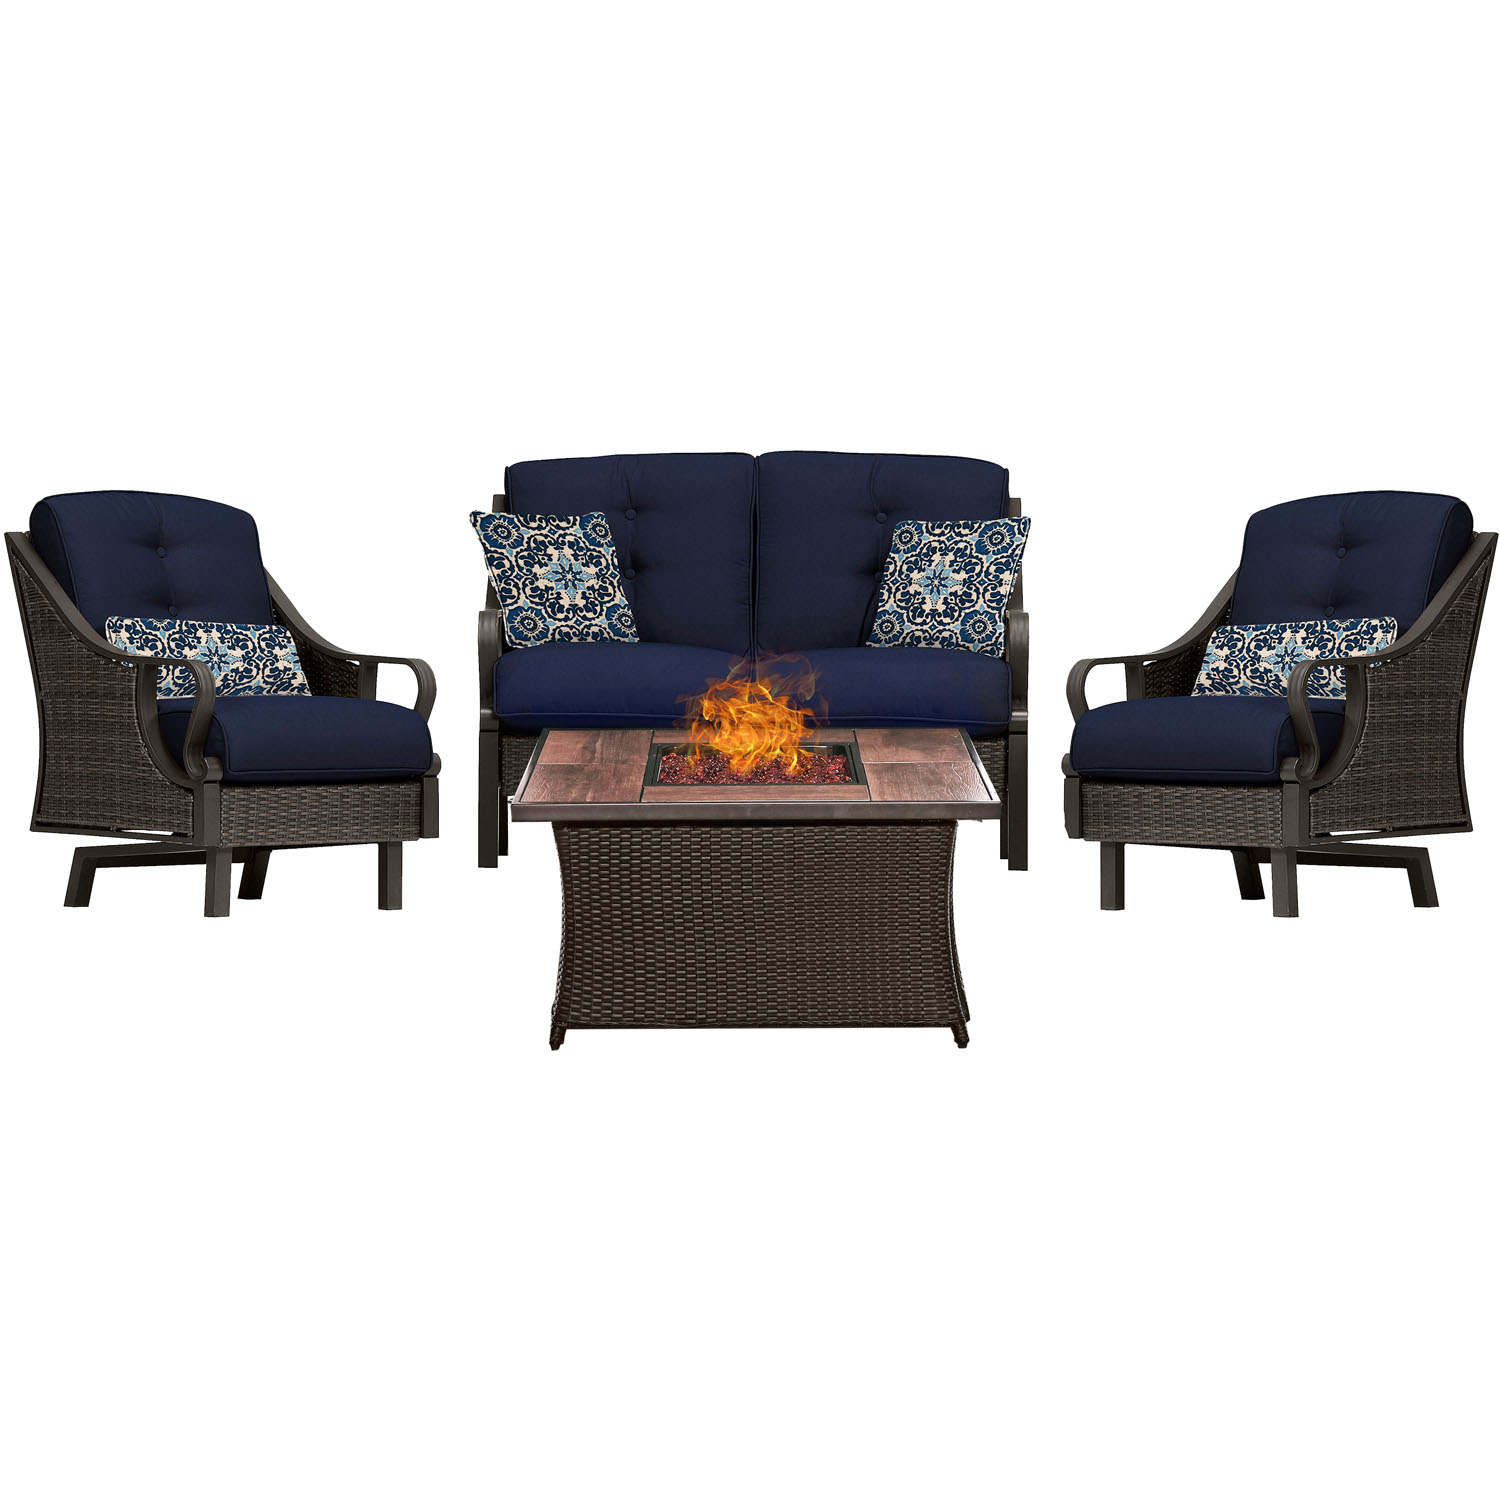 Hanover Ventura 4 Pcs Wicker and Steel Propane Fire Pit Chat Set, Navy Blue - image 5 of 10